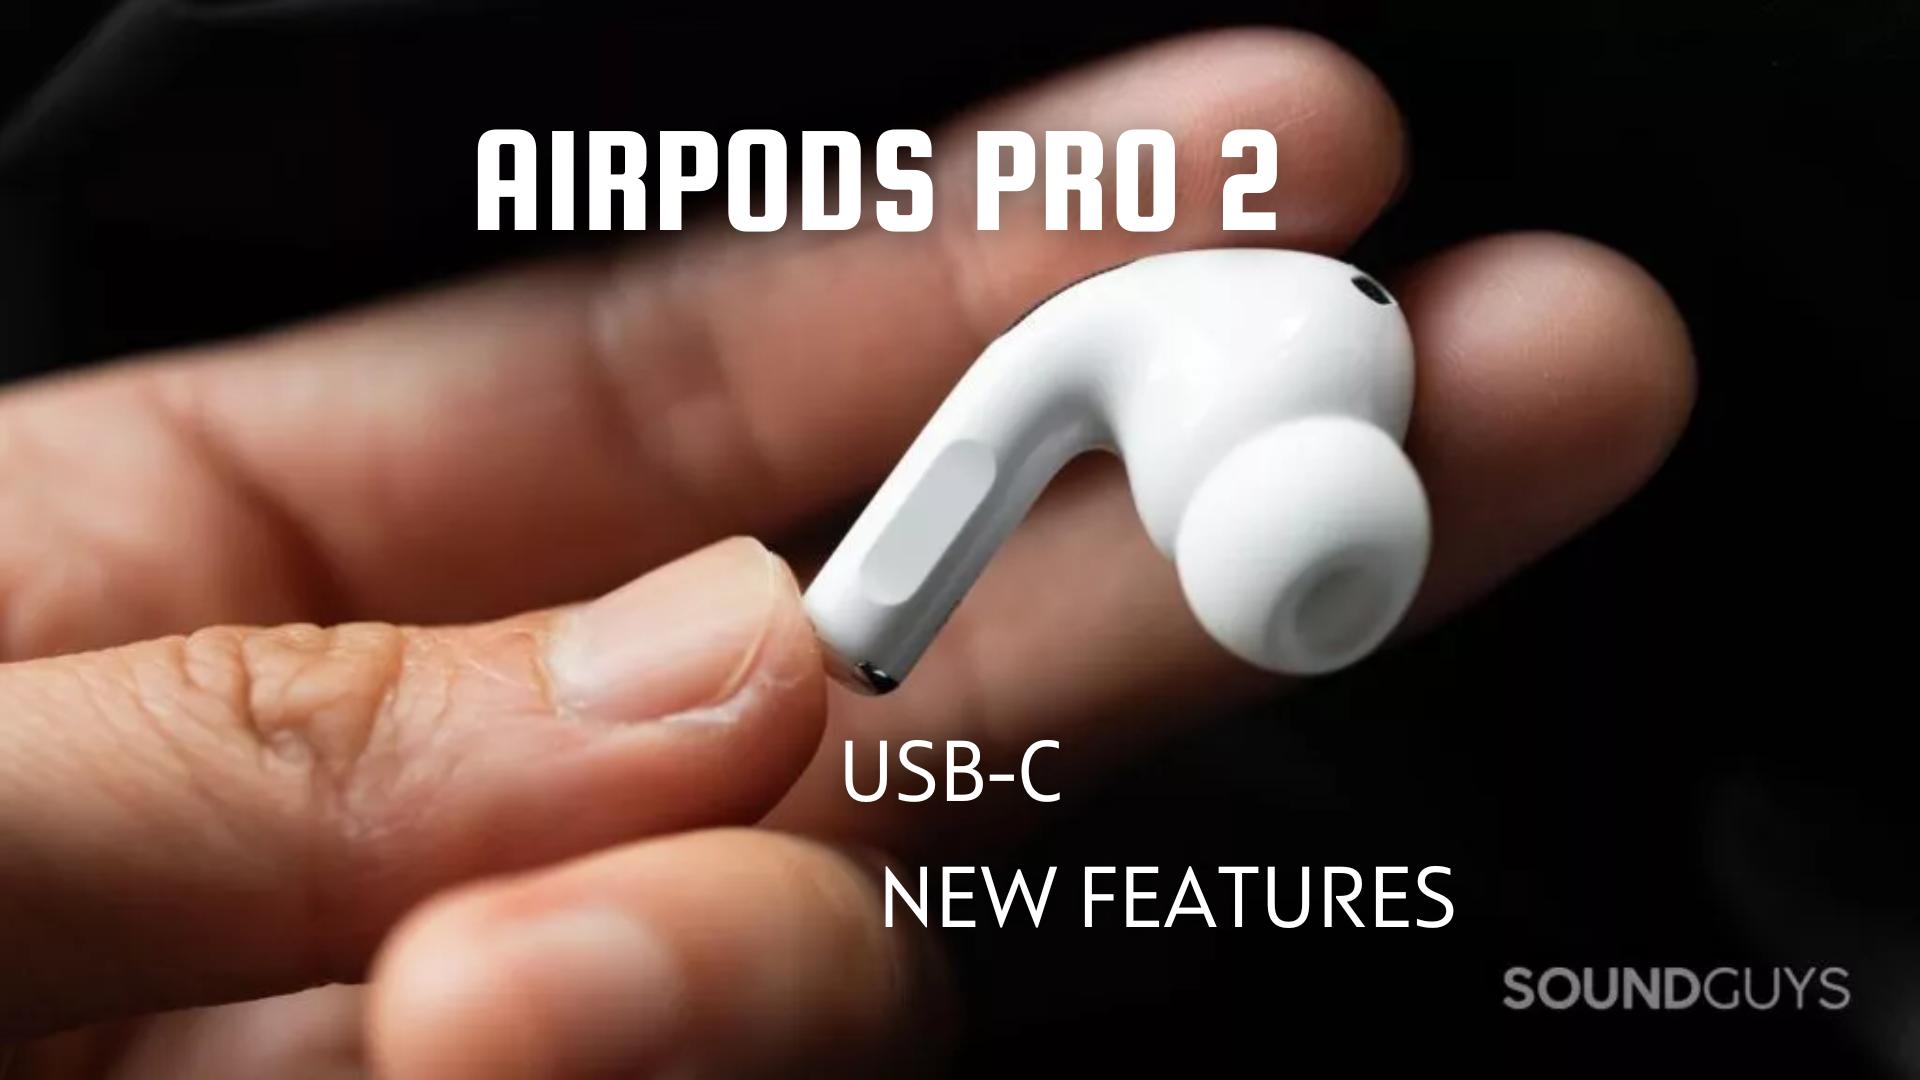 Apple refreshes the AirPods Pro 2 with USB-C and new software features